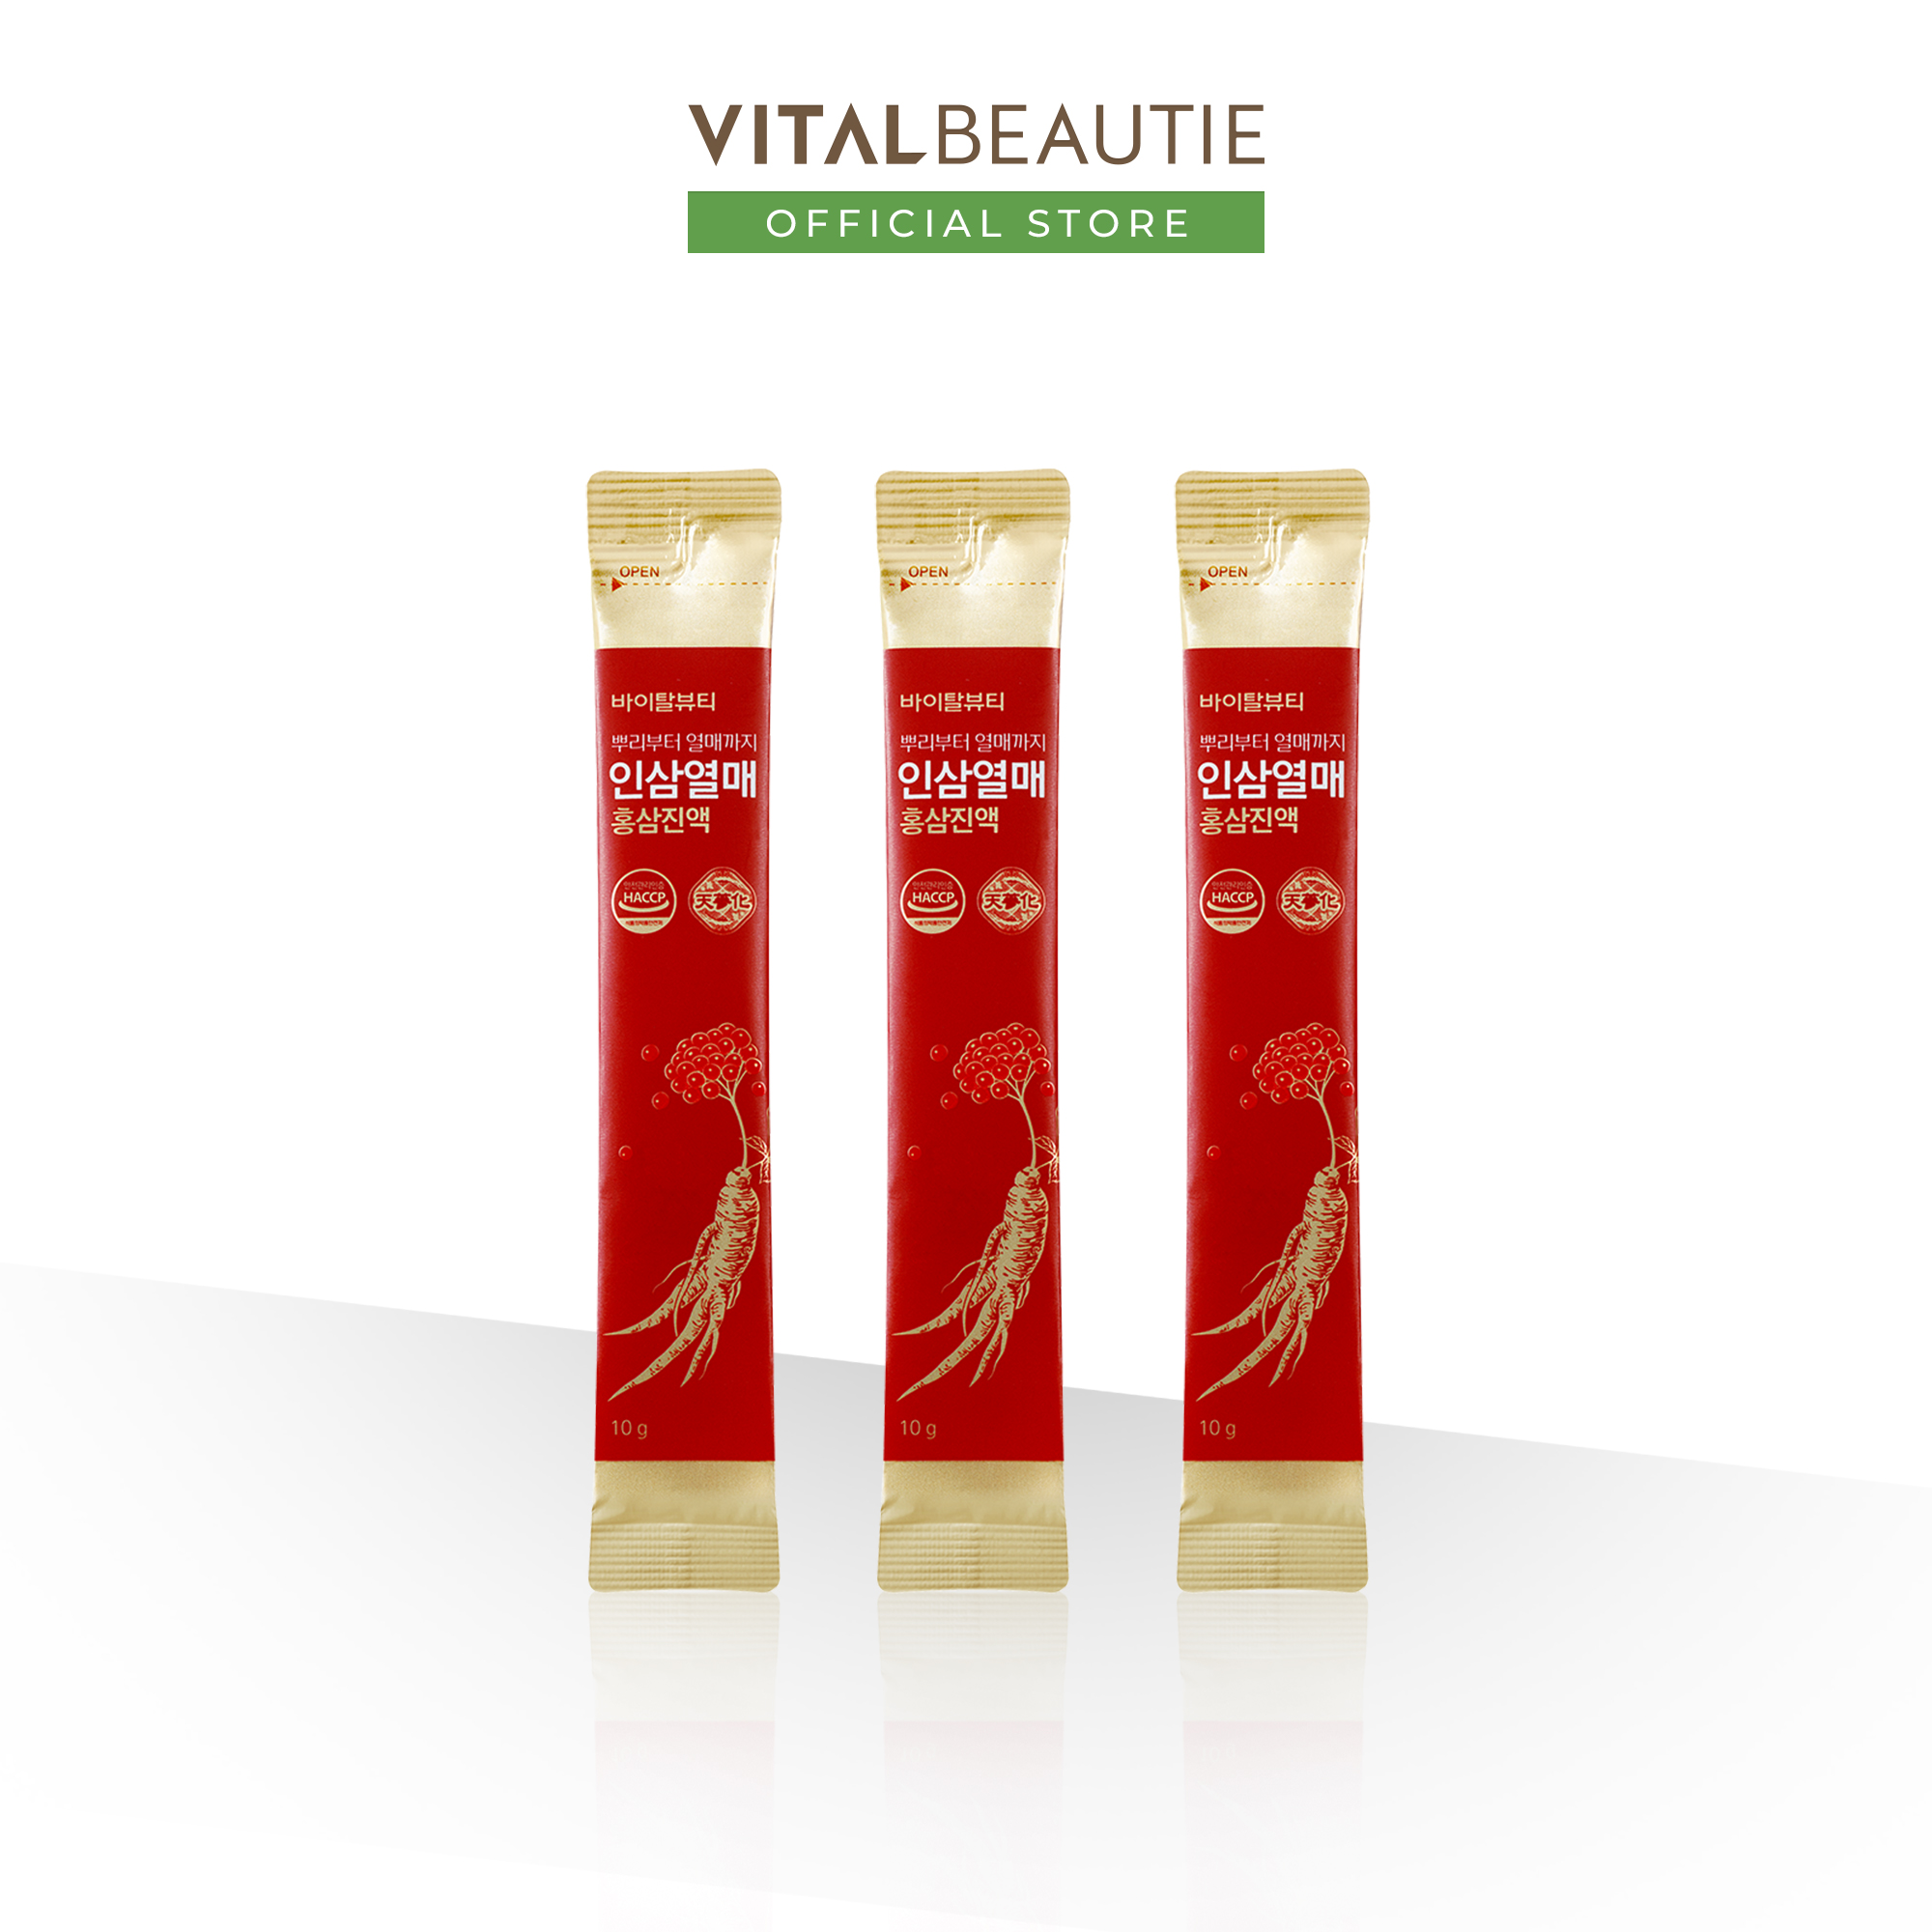 review-nuoc-uong-dinh-duong-vital-beautie-6